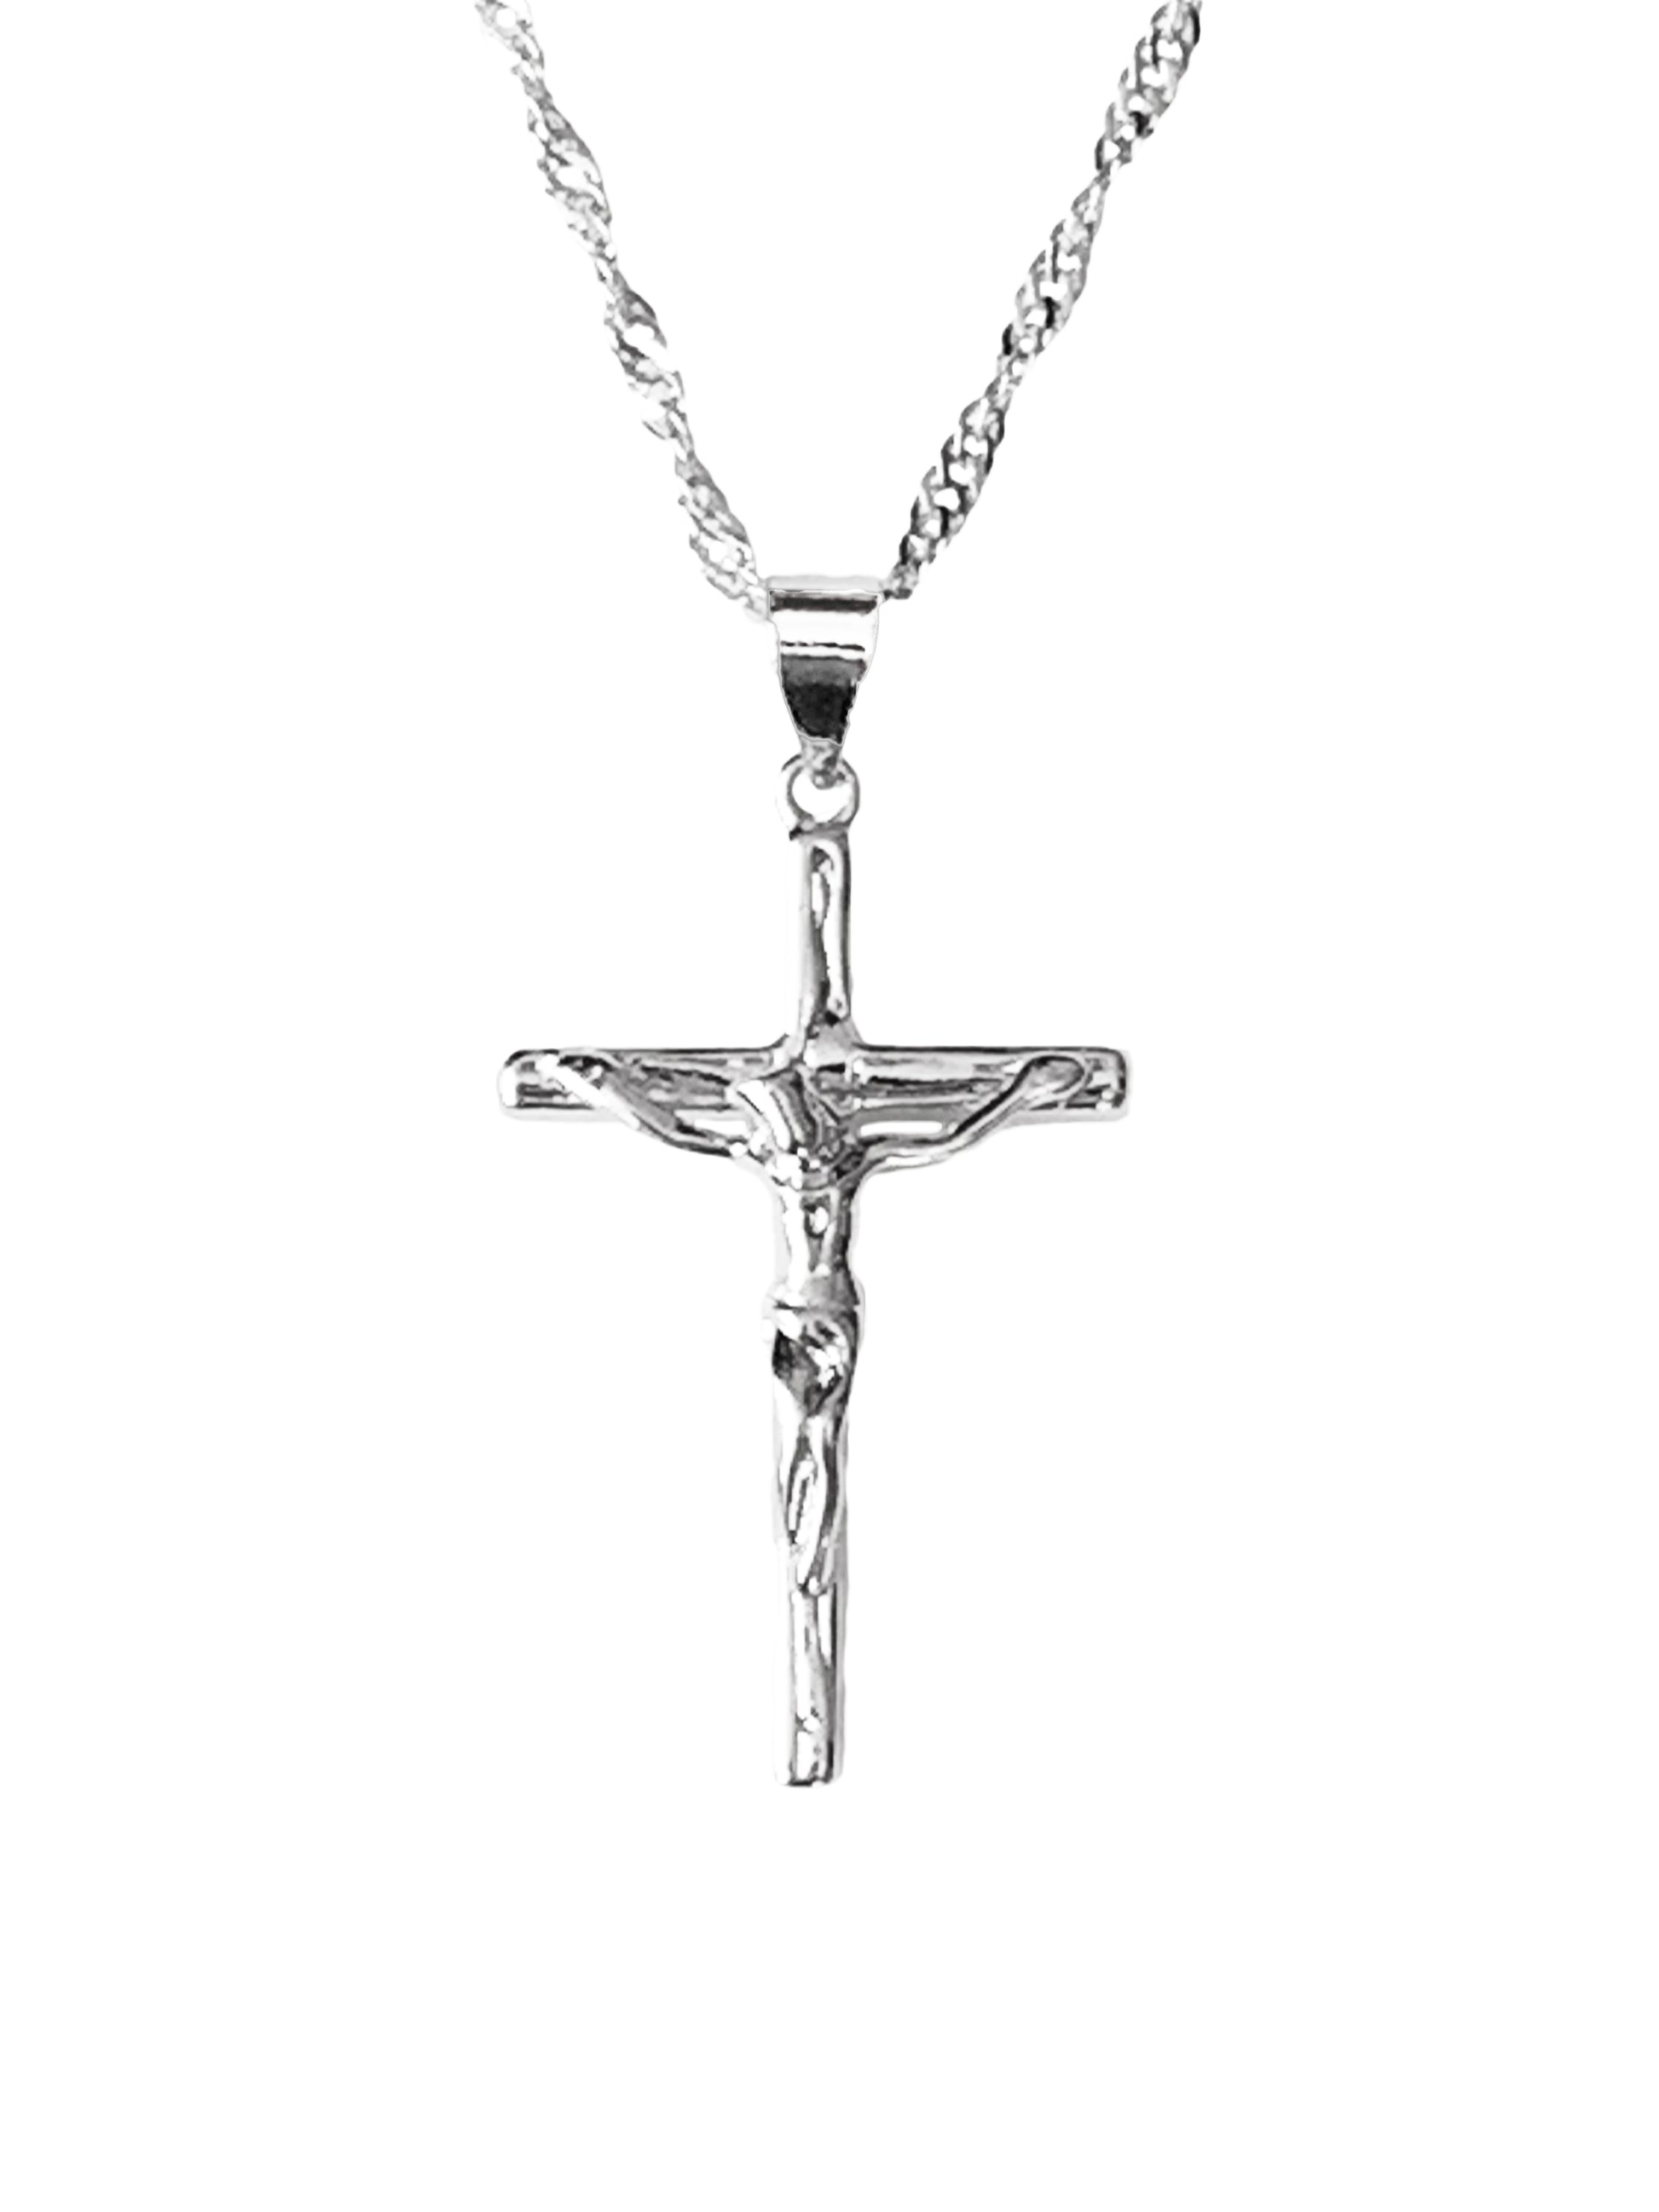 Crucifix Necklace, It is also ideal as a First Communion gift, confirmation, christening, baptism and gift for Christmas